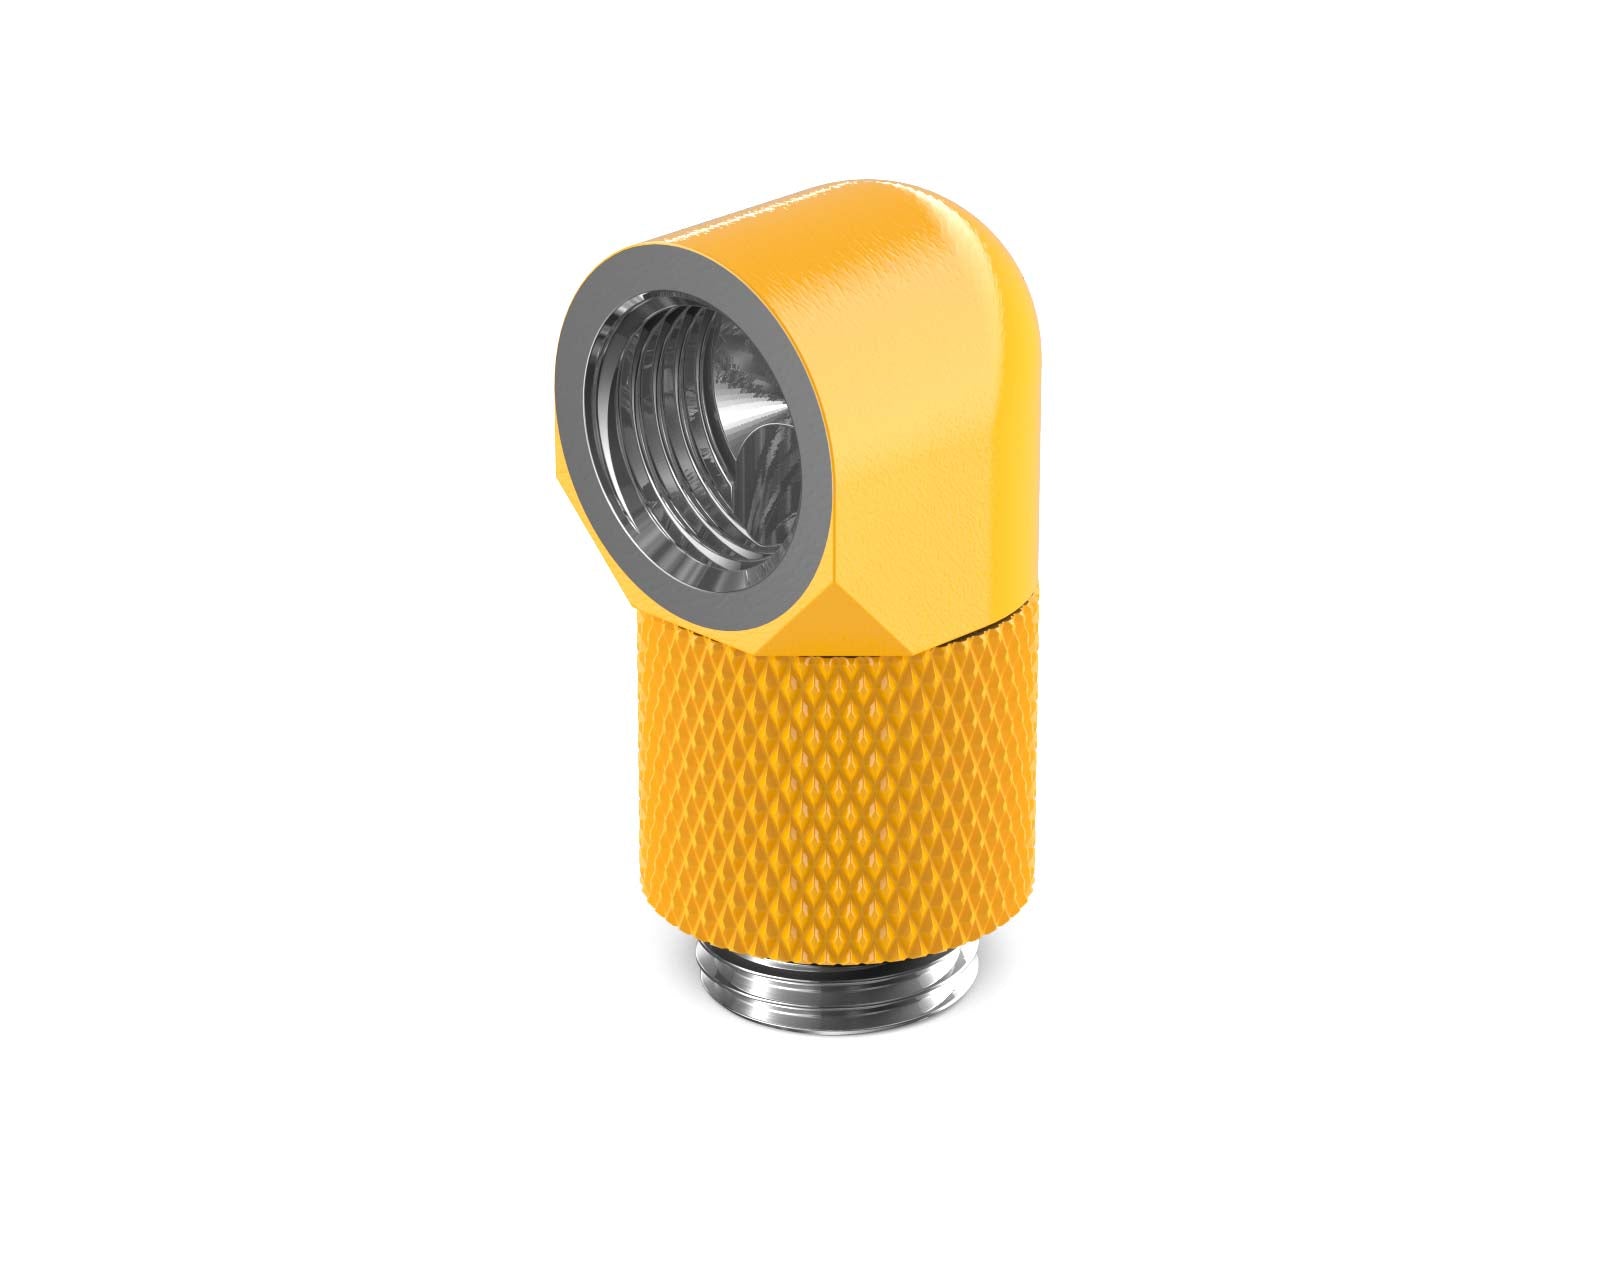 PrimoChill Male to Female G 1/4in. 90 Degree SX Rotary 15mm Extension Elbow Fitting - PrimoChill - KEEPING IT COOL Yellow